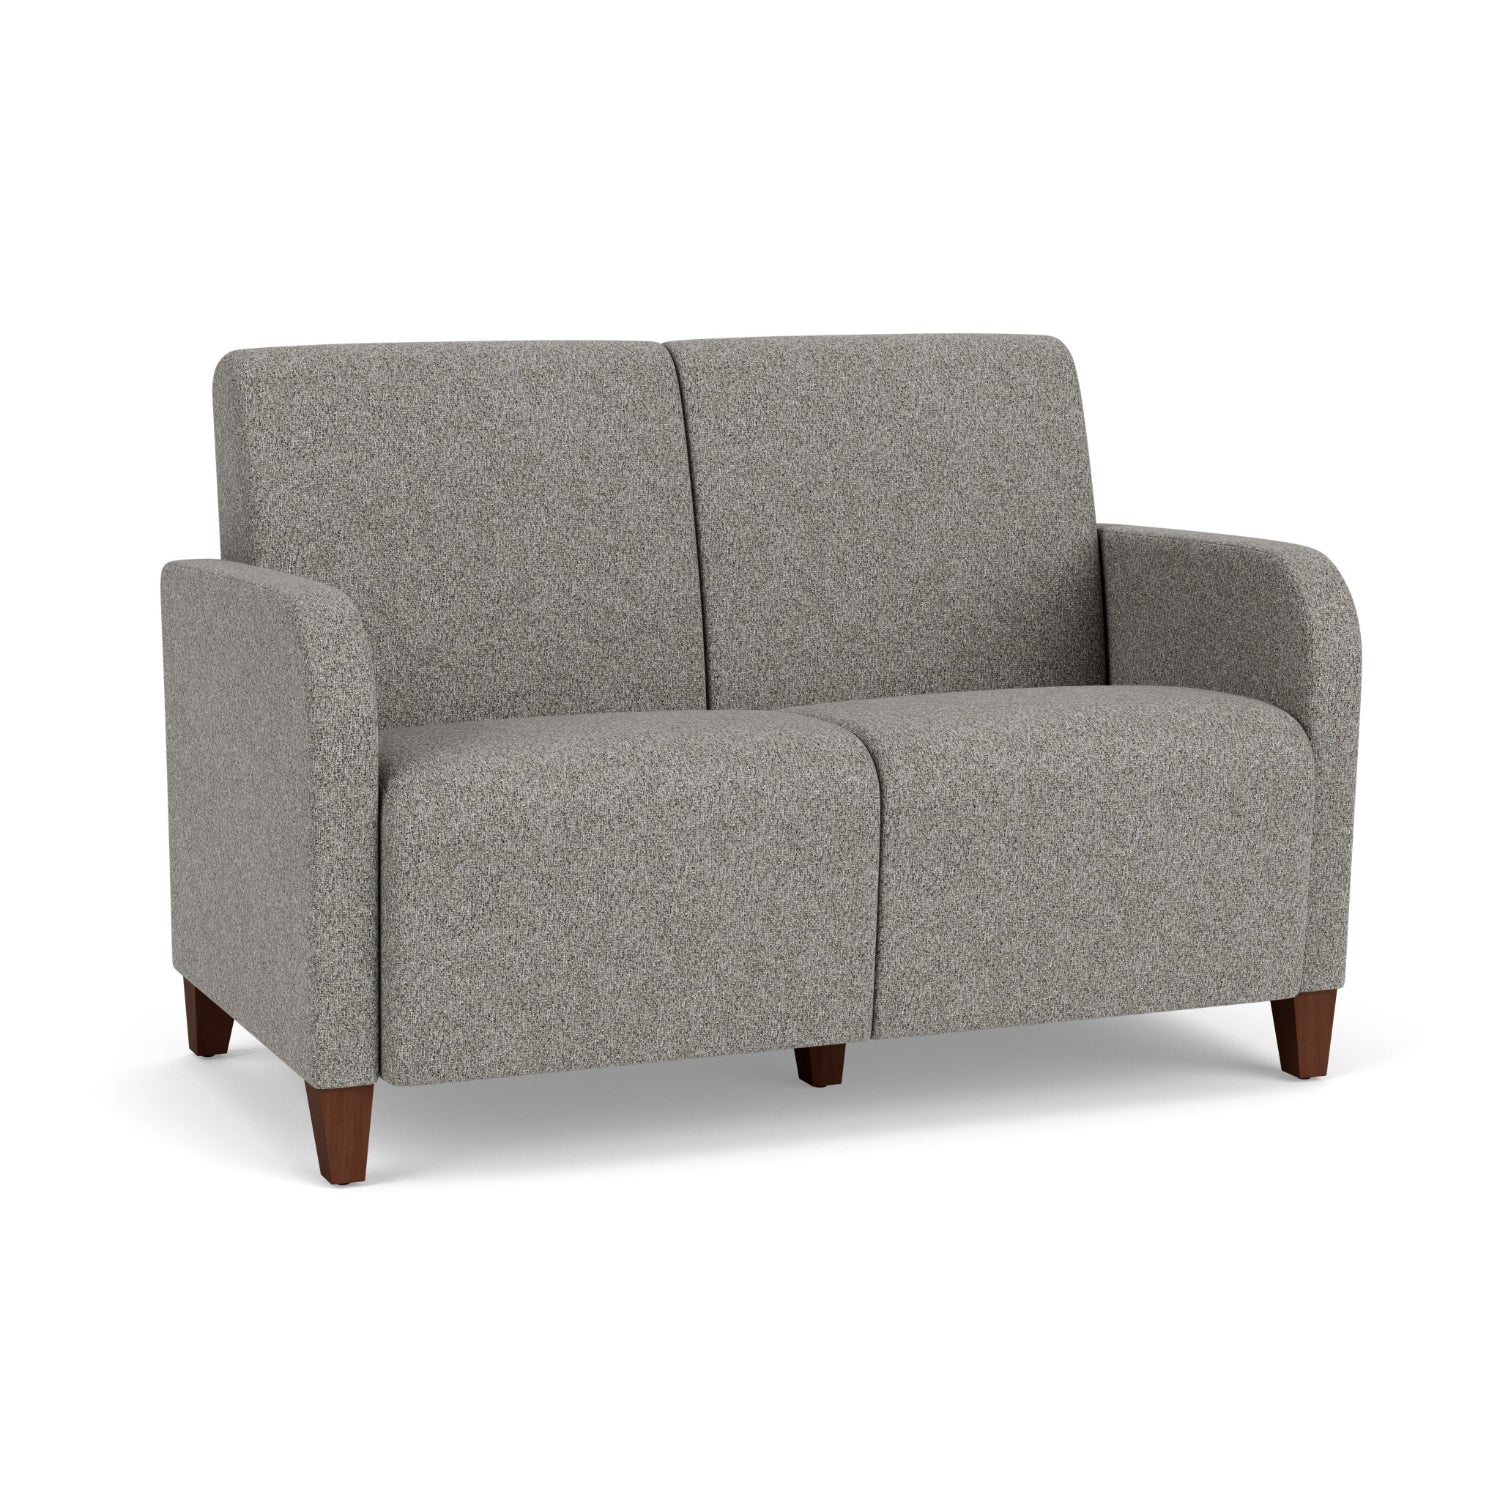 Siena Collection Reception Seating, 2-Seat Sofa, Standard Fabric Upholstery, FREE SHIPPING